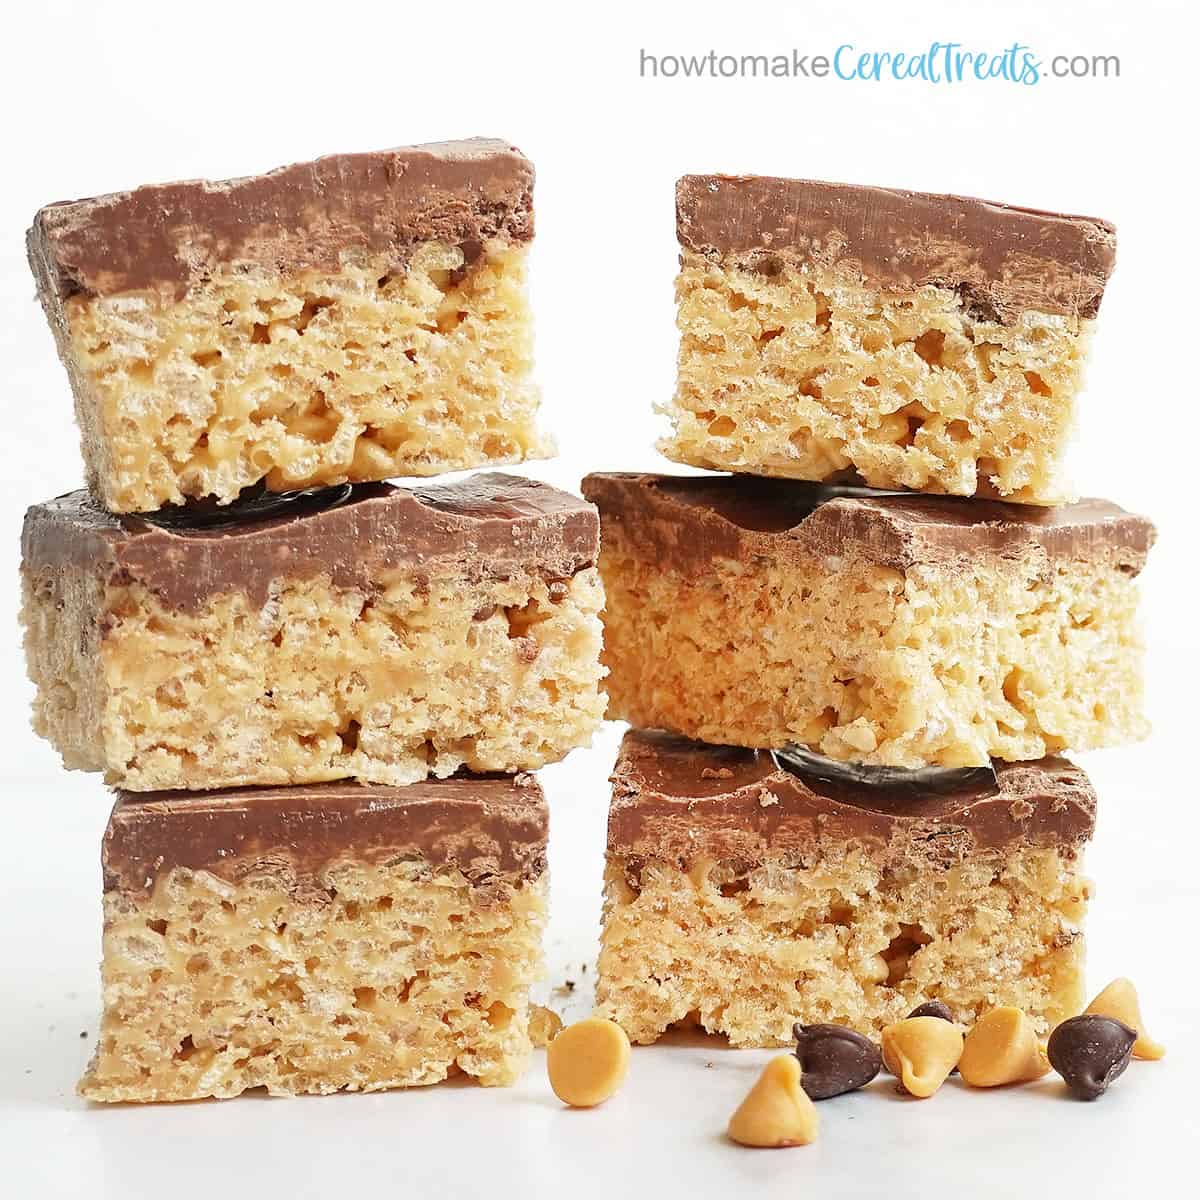 Chocolate peanut butter Scotcharoos with Rice Krispies